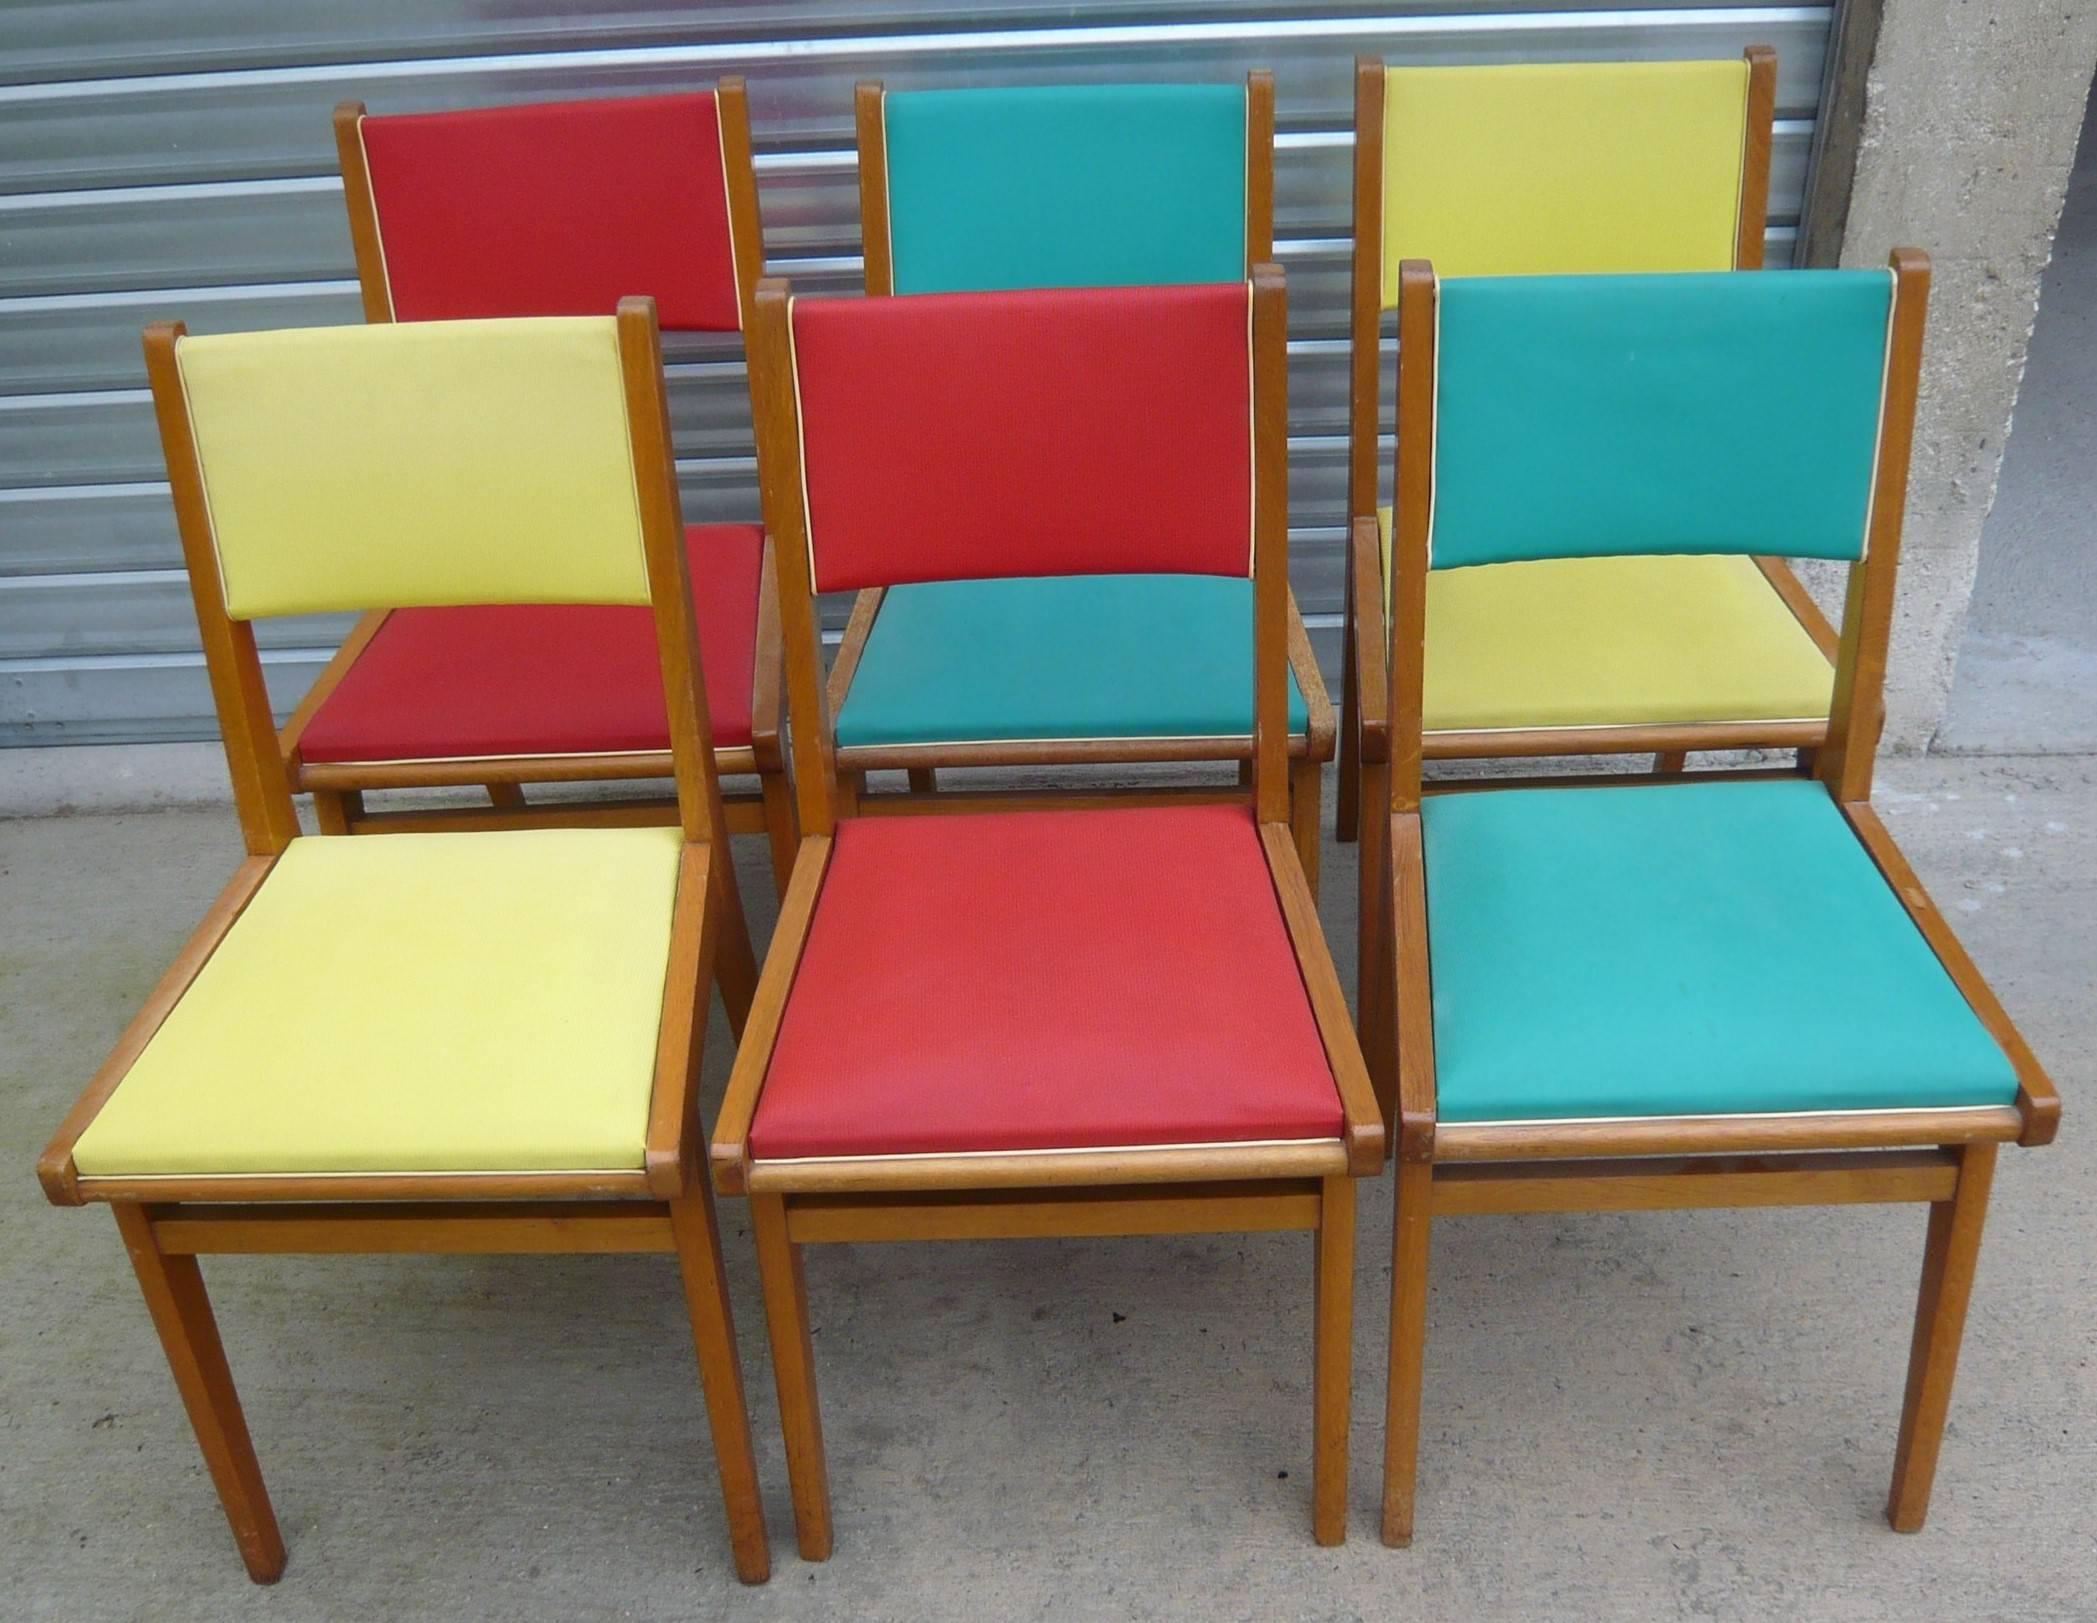 Original French Mid-Century set of six chairs, in three different great vintage colors.(vintage yellow, red and blue)
They are all stabile, solid, chairs made in massif beech wood, honey color, light weight. 

They have been all restored and